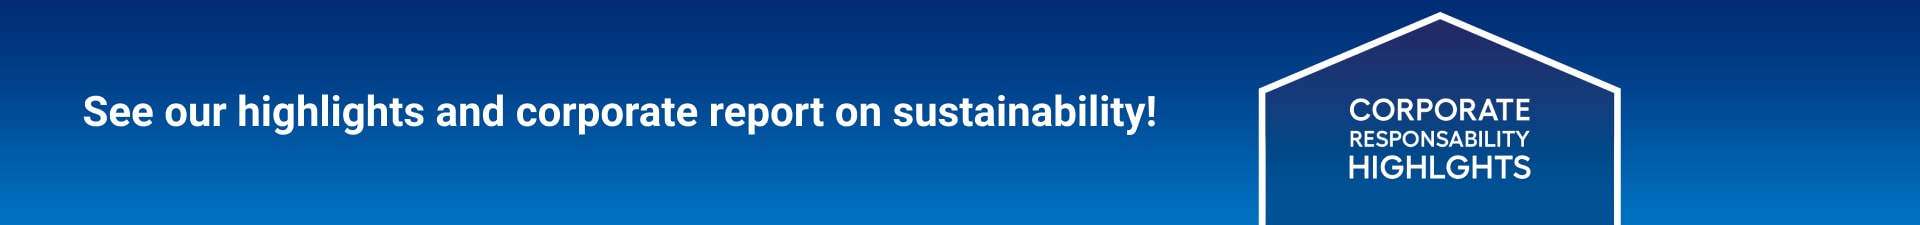 Lowe’s Canada Corporate Responsibility Highlights